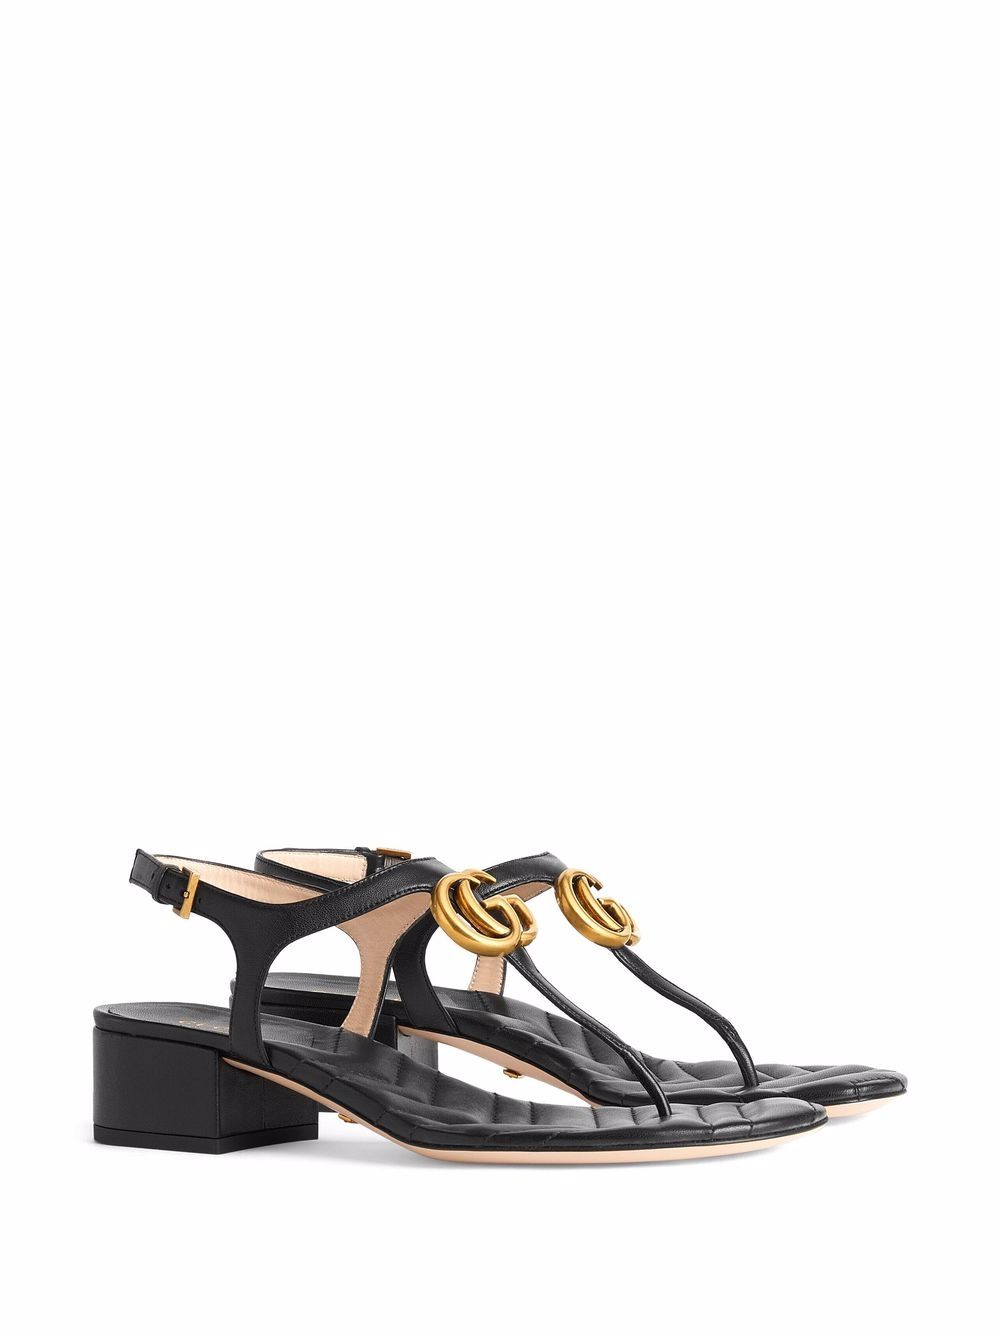 Gucci Double G Leather Sandals - Farfetch